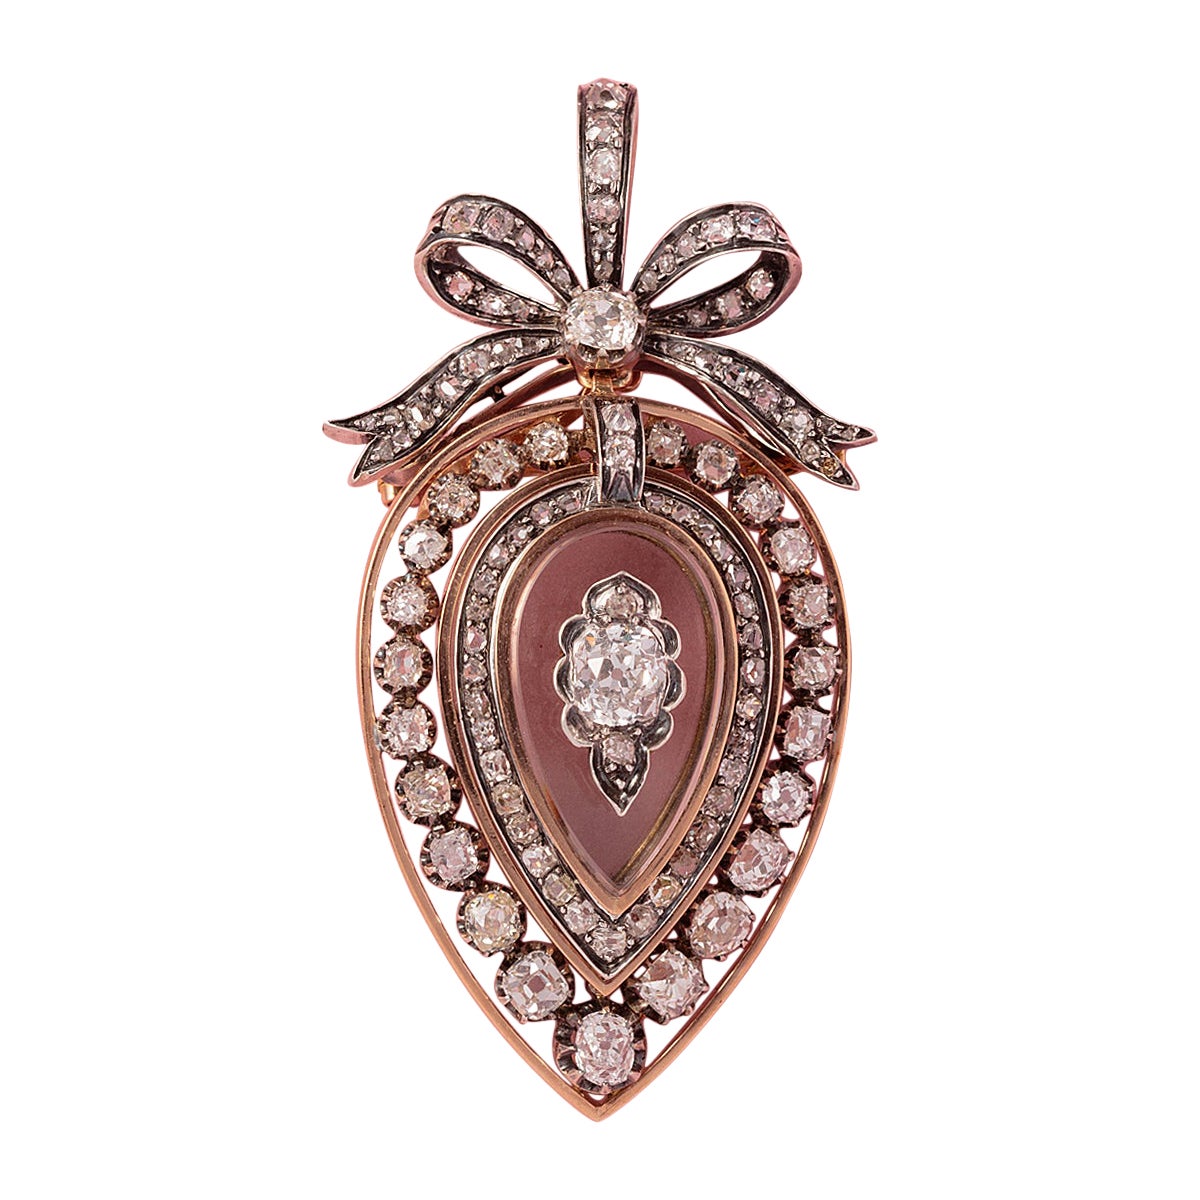 Gold and silver heart locket with diamond and rock crystal